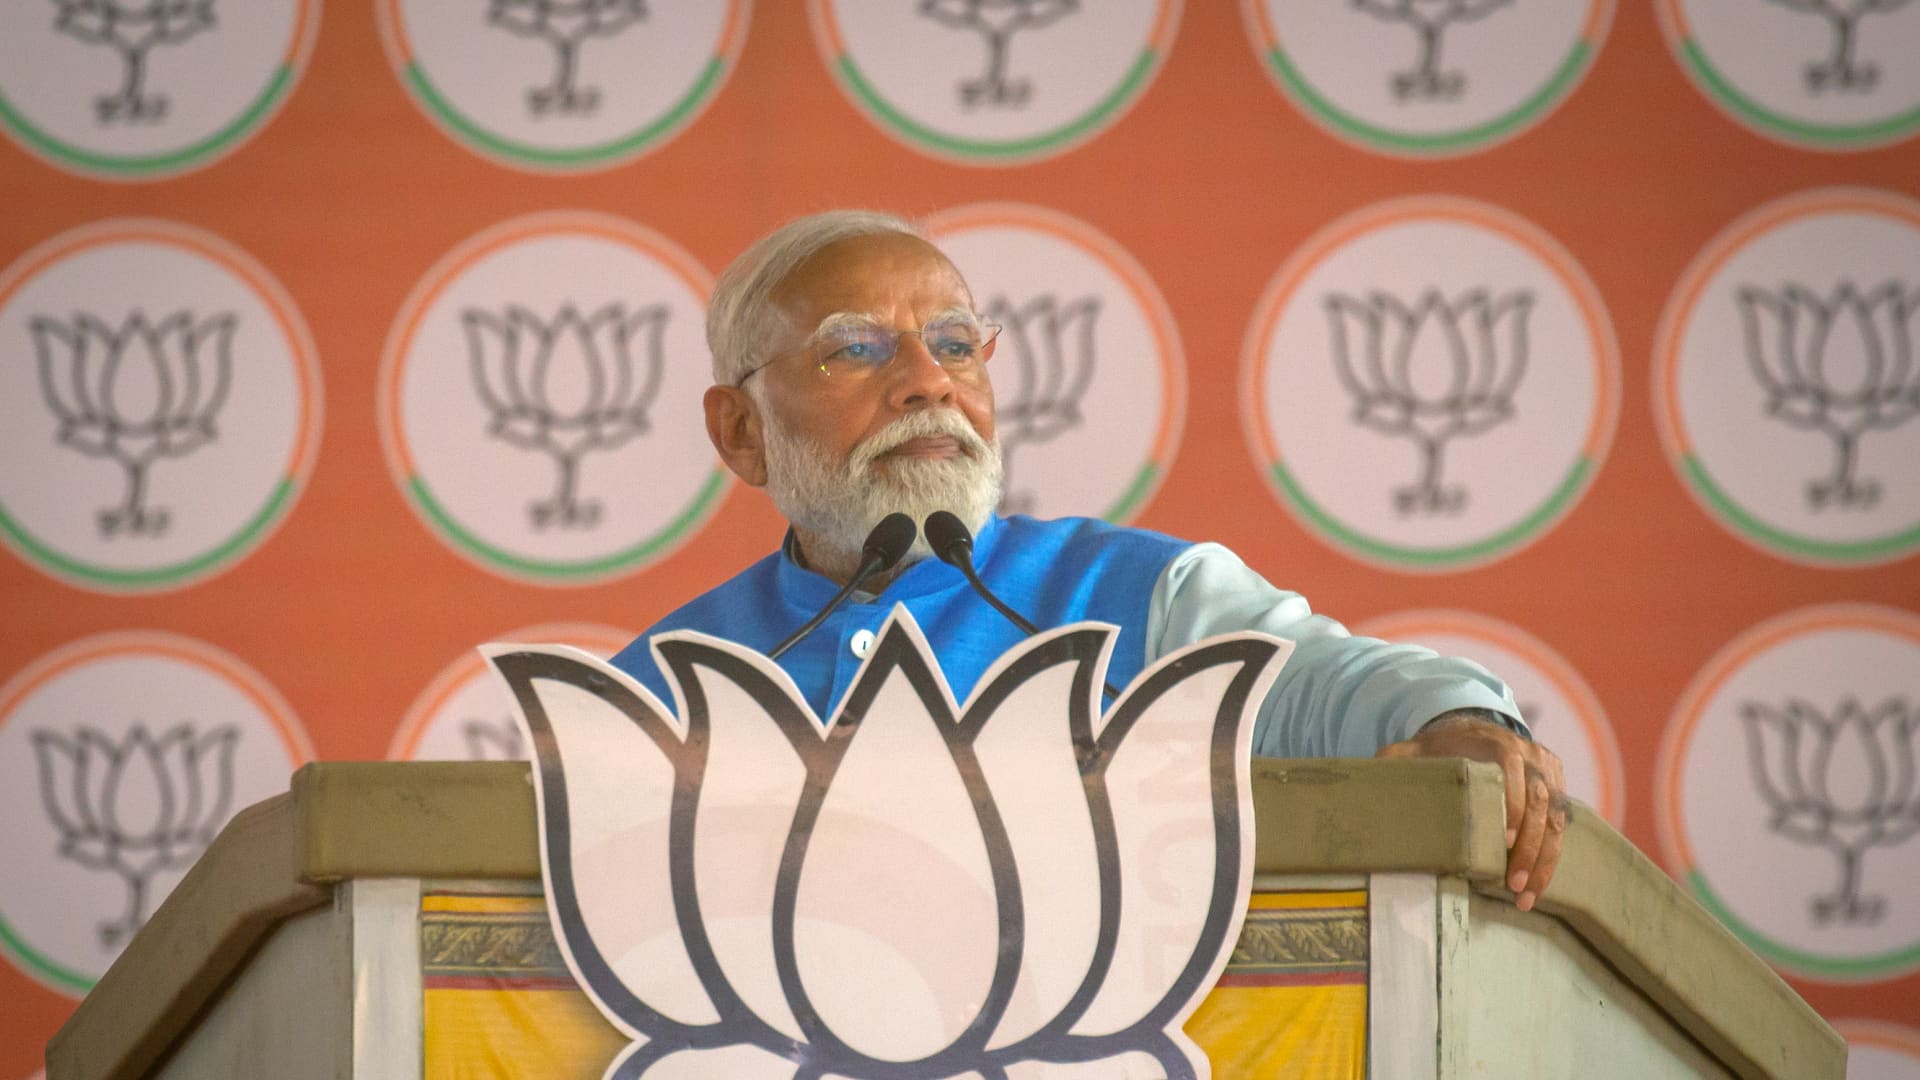 Modis BJP is set to gain a foothold in Tamil Nadu [Video]